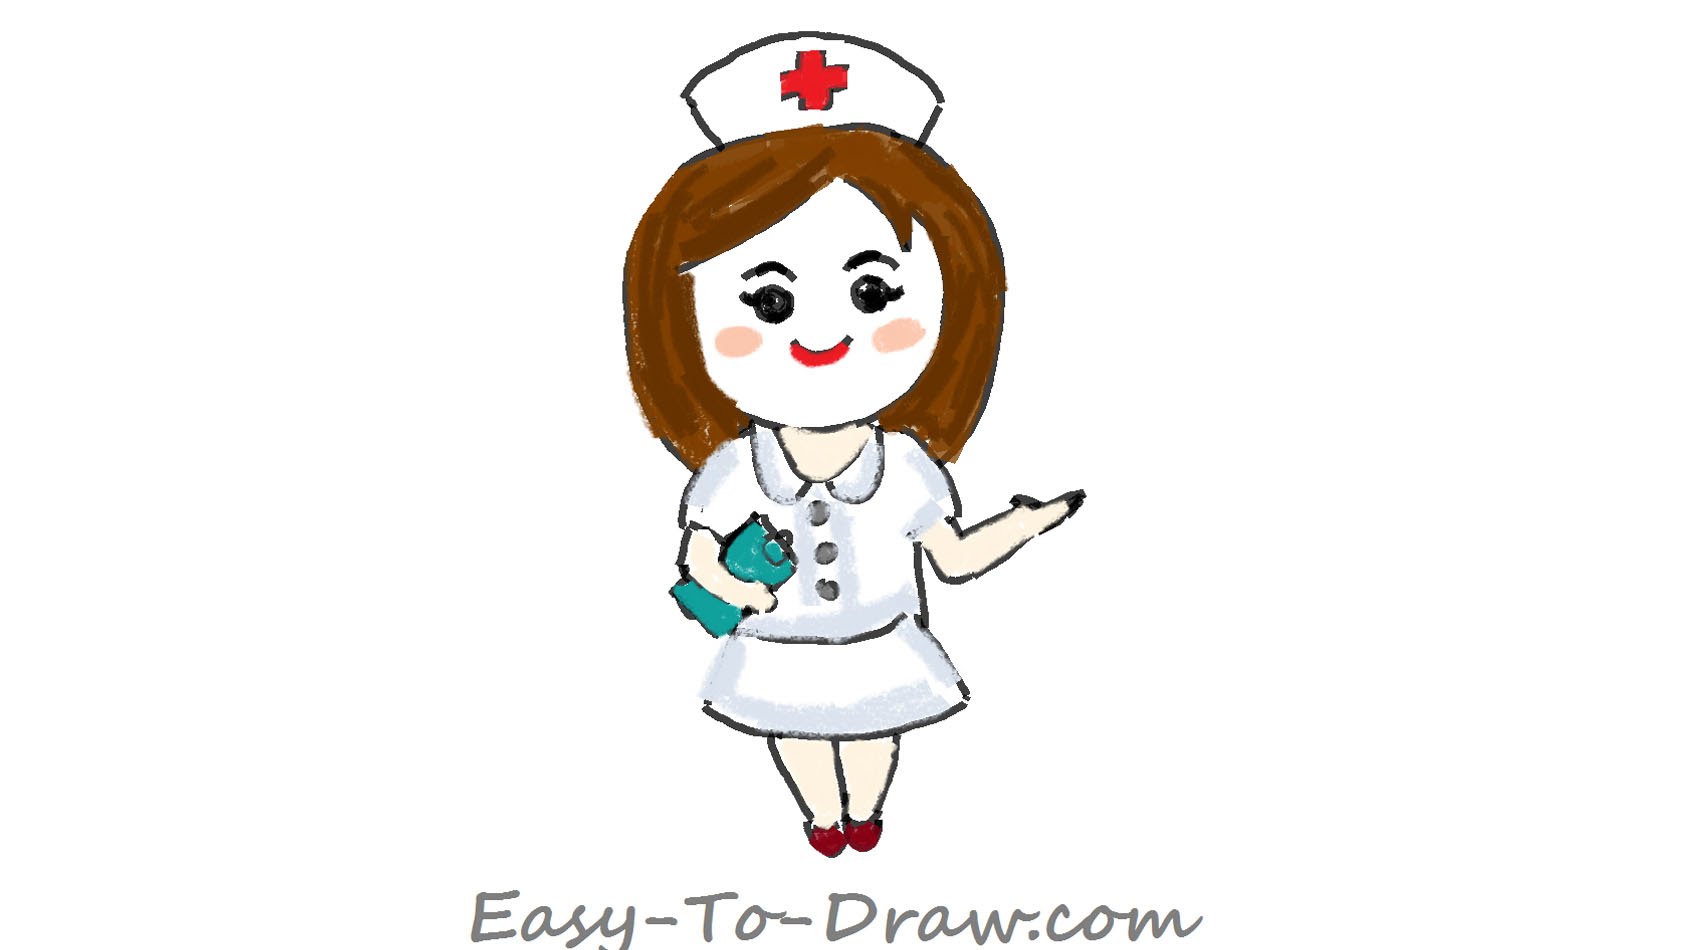 1687x950 How To Draw A Cartoon Registered Nurse With A Notebook In Hand.